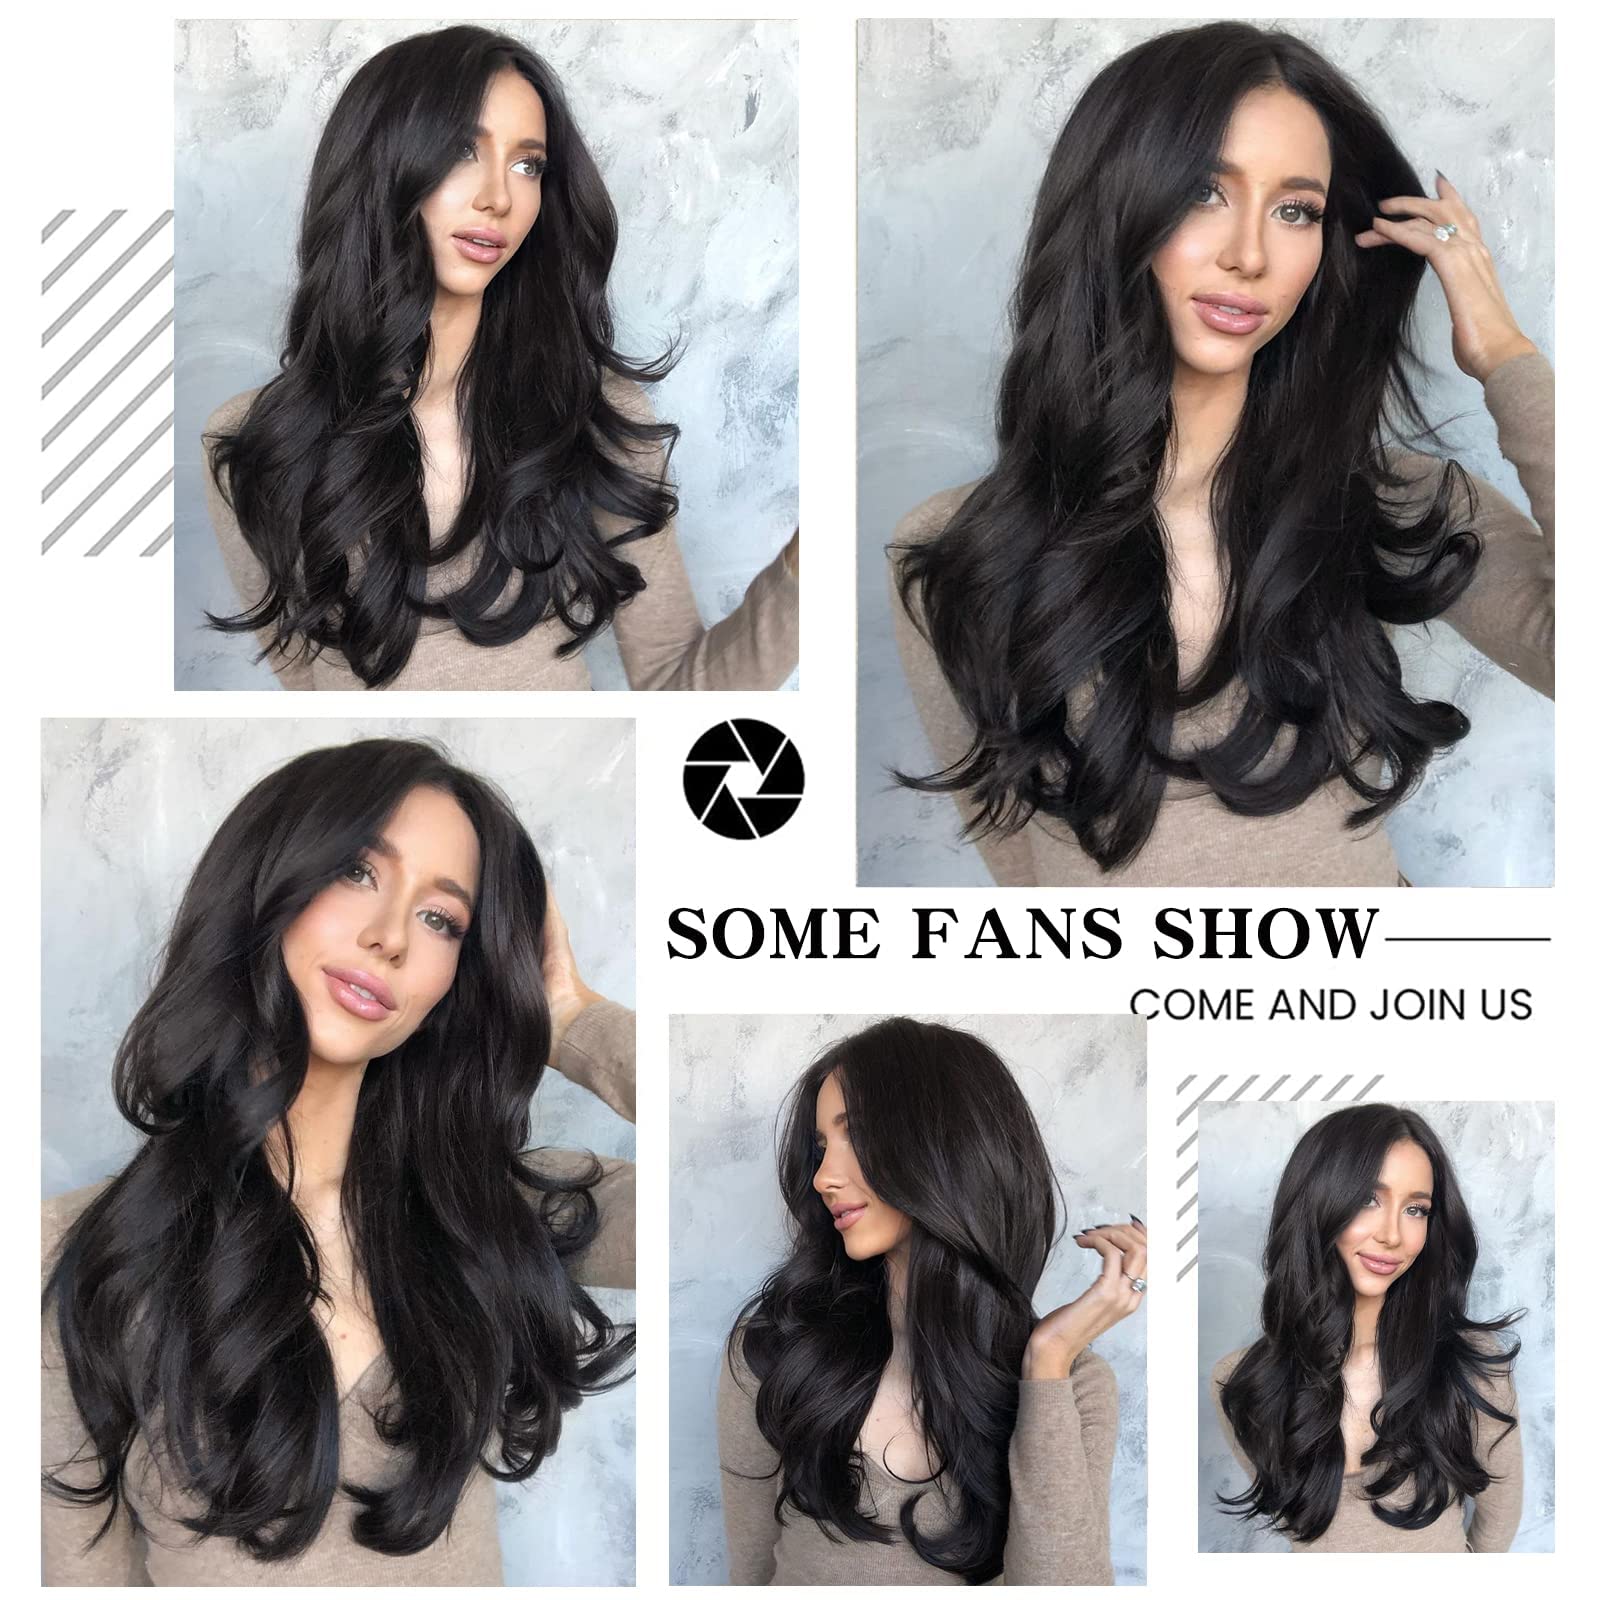 AISI QUEENS Black Wavy Wigs for Women Long Curly Wig Synthetic Party Wigs Middle Part Full Wigs Natural Looking 20 Inch